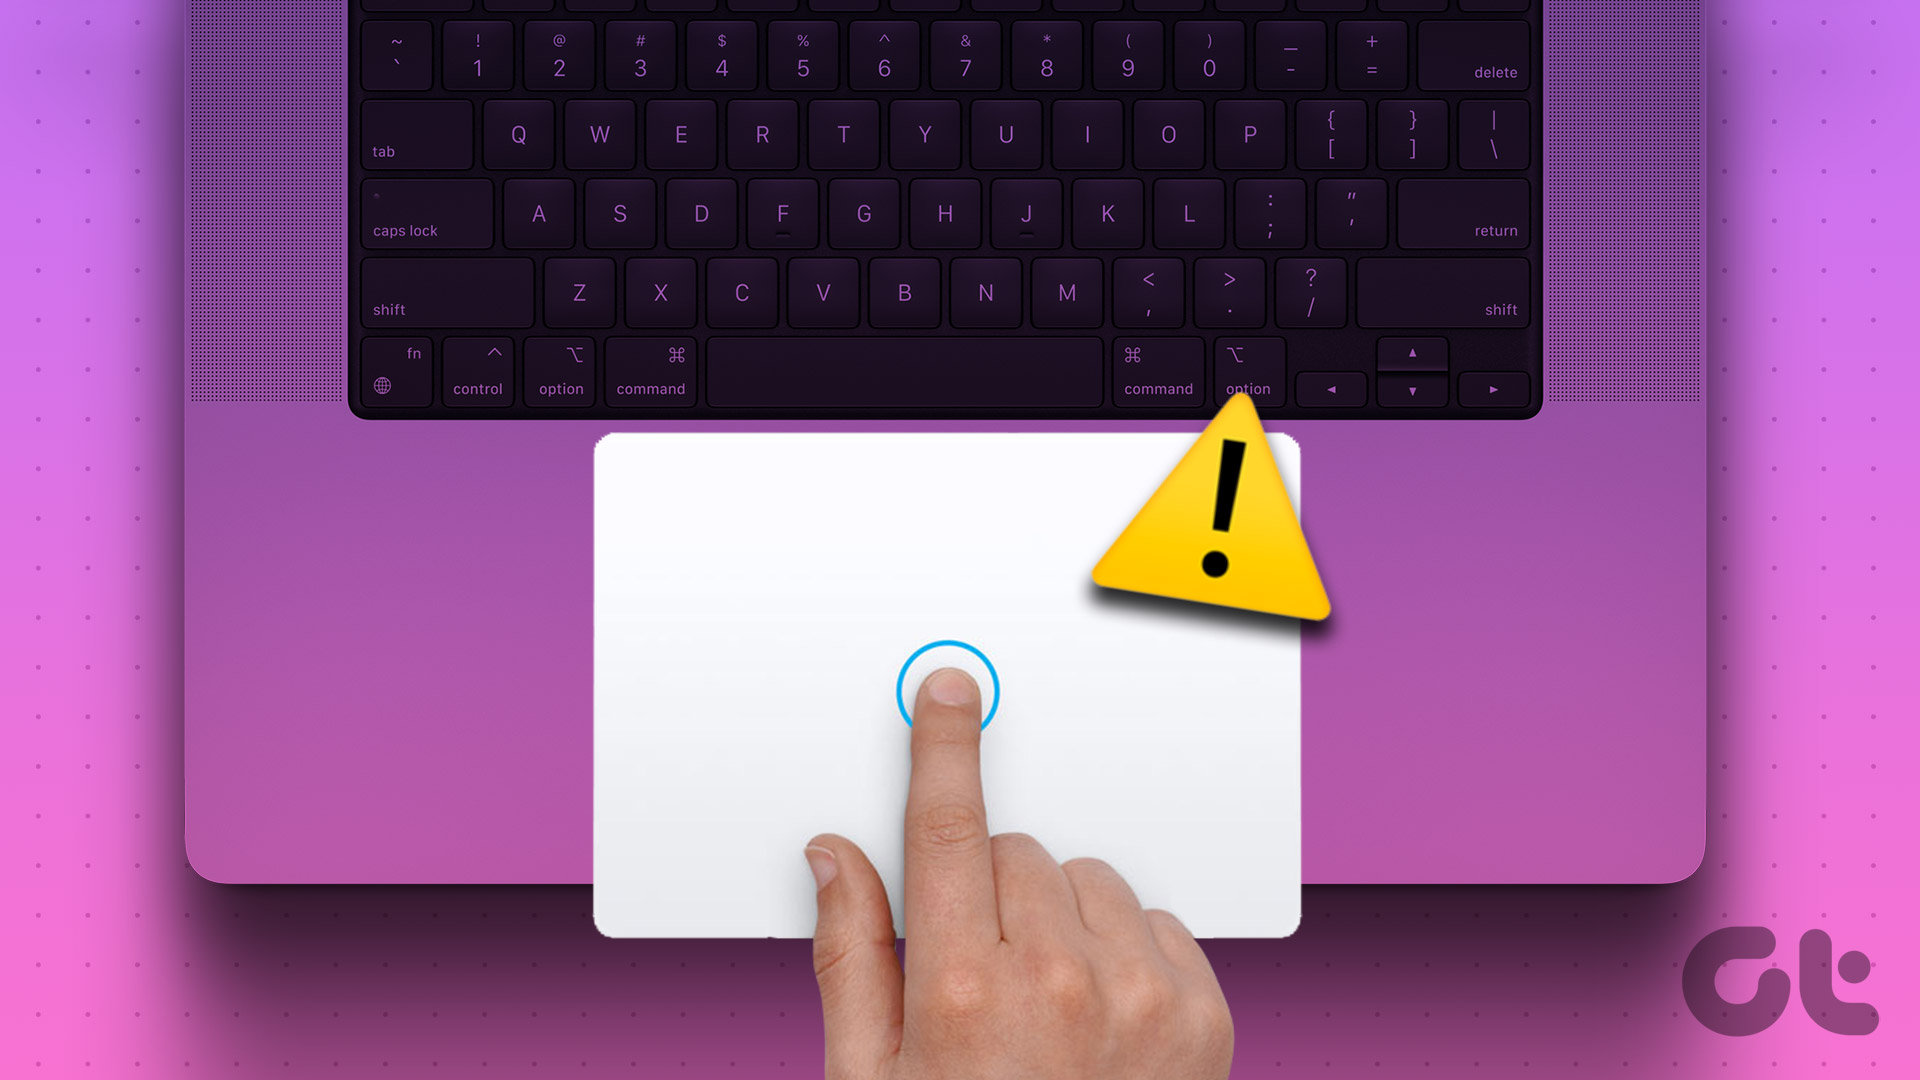 How to fix trackpad gestures not working on Mac